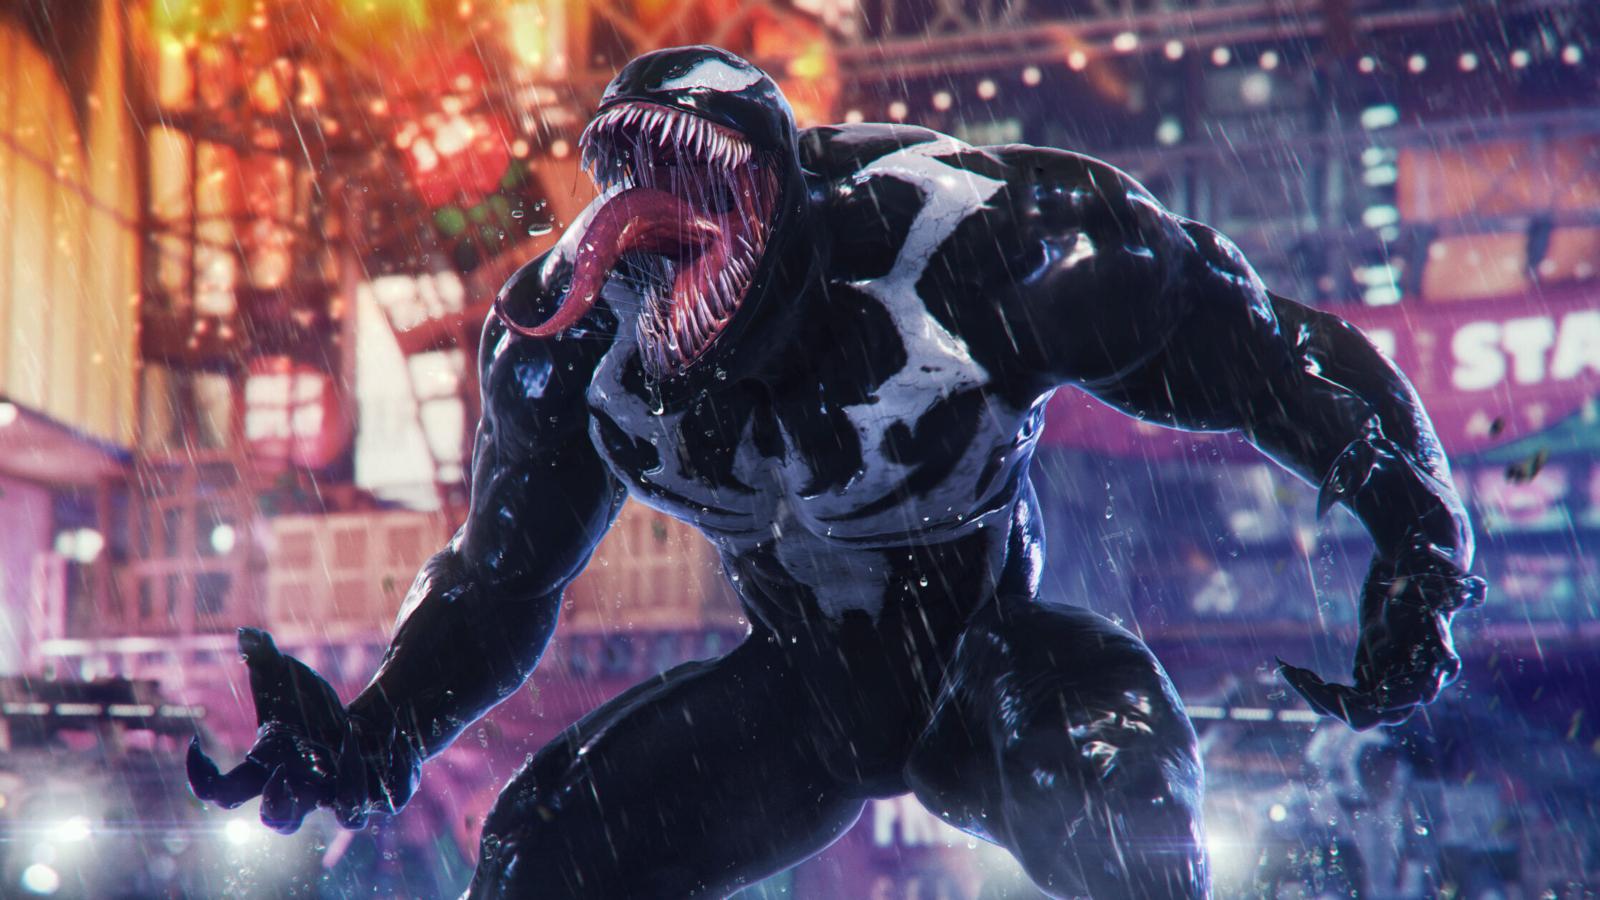 Spider-Man 2' Ending Explained: New Heroes and Villains Set Up the DLC and ' Spider-Man 3